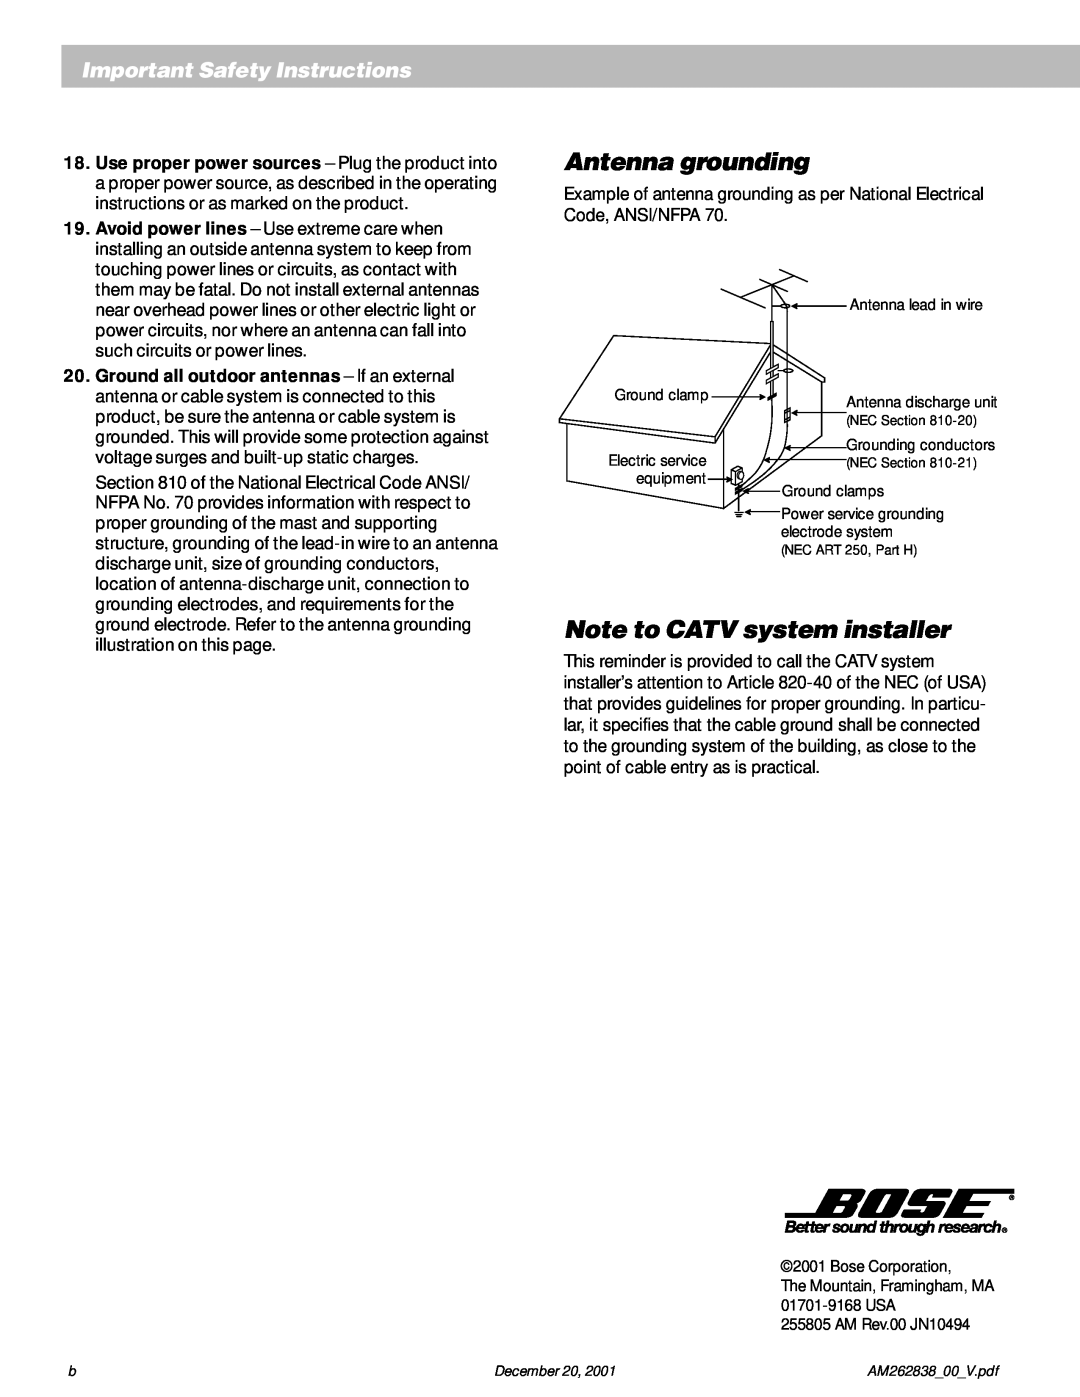 Bose AM262838_00_V Antenna grounding, Note to CATV system installer, Important Safety Instructions, Antenna lead in wire 